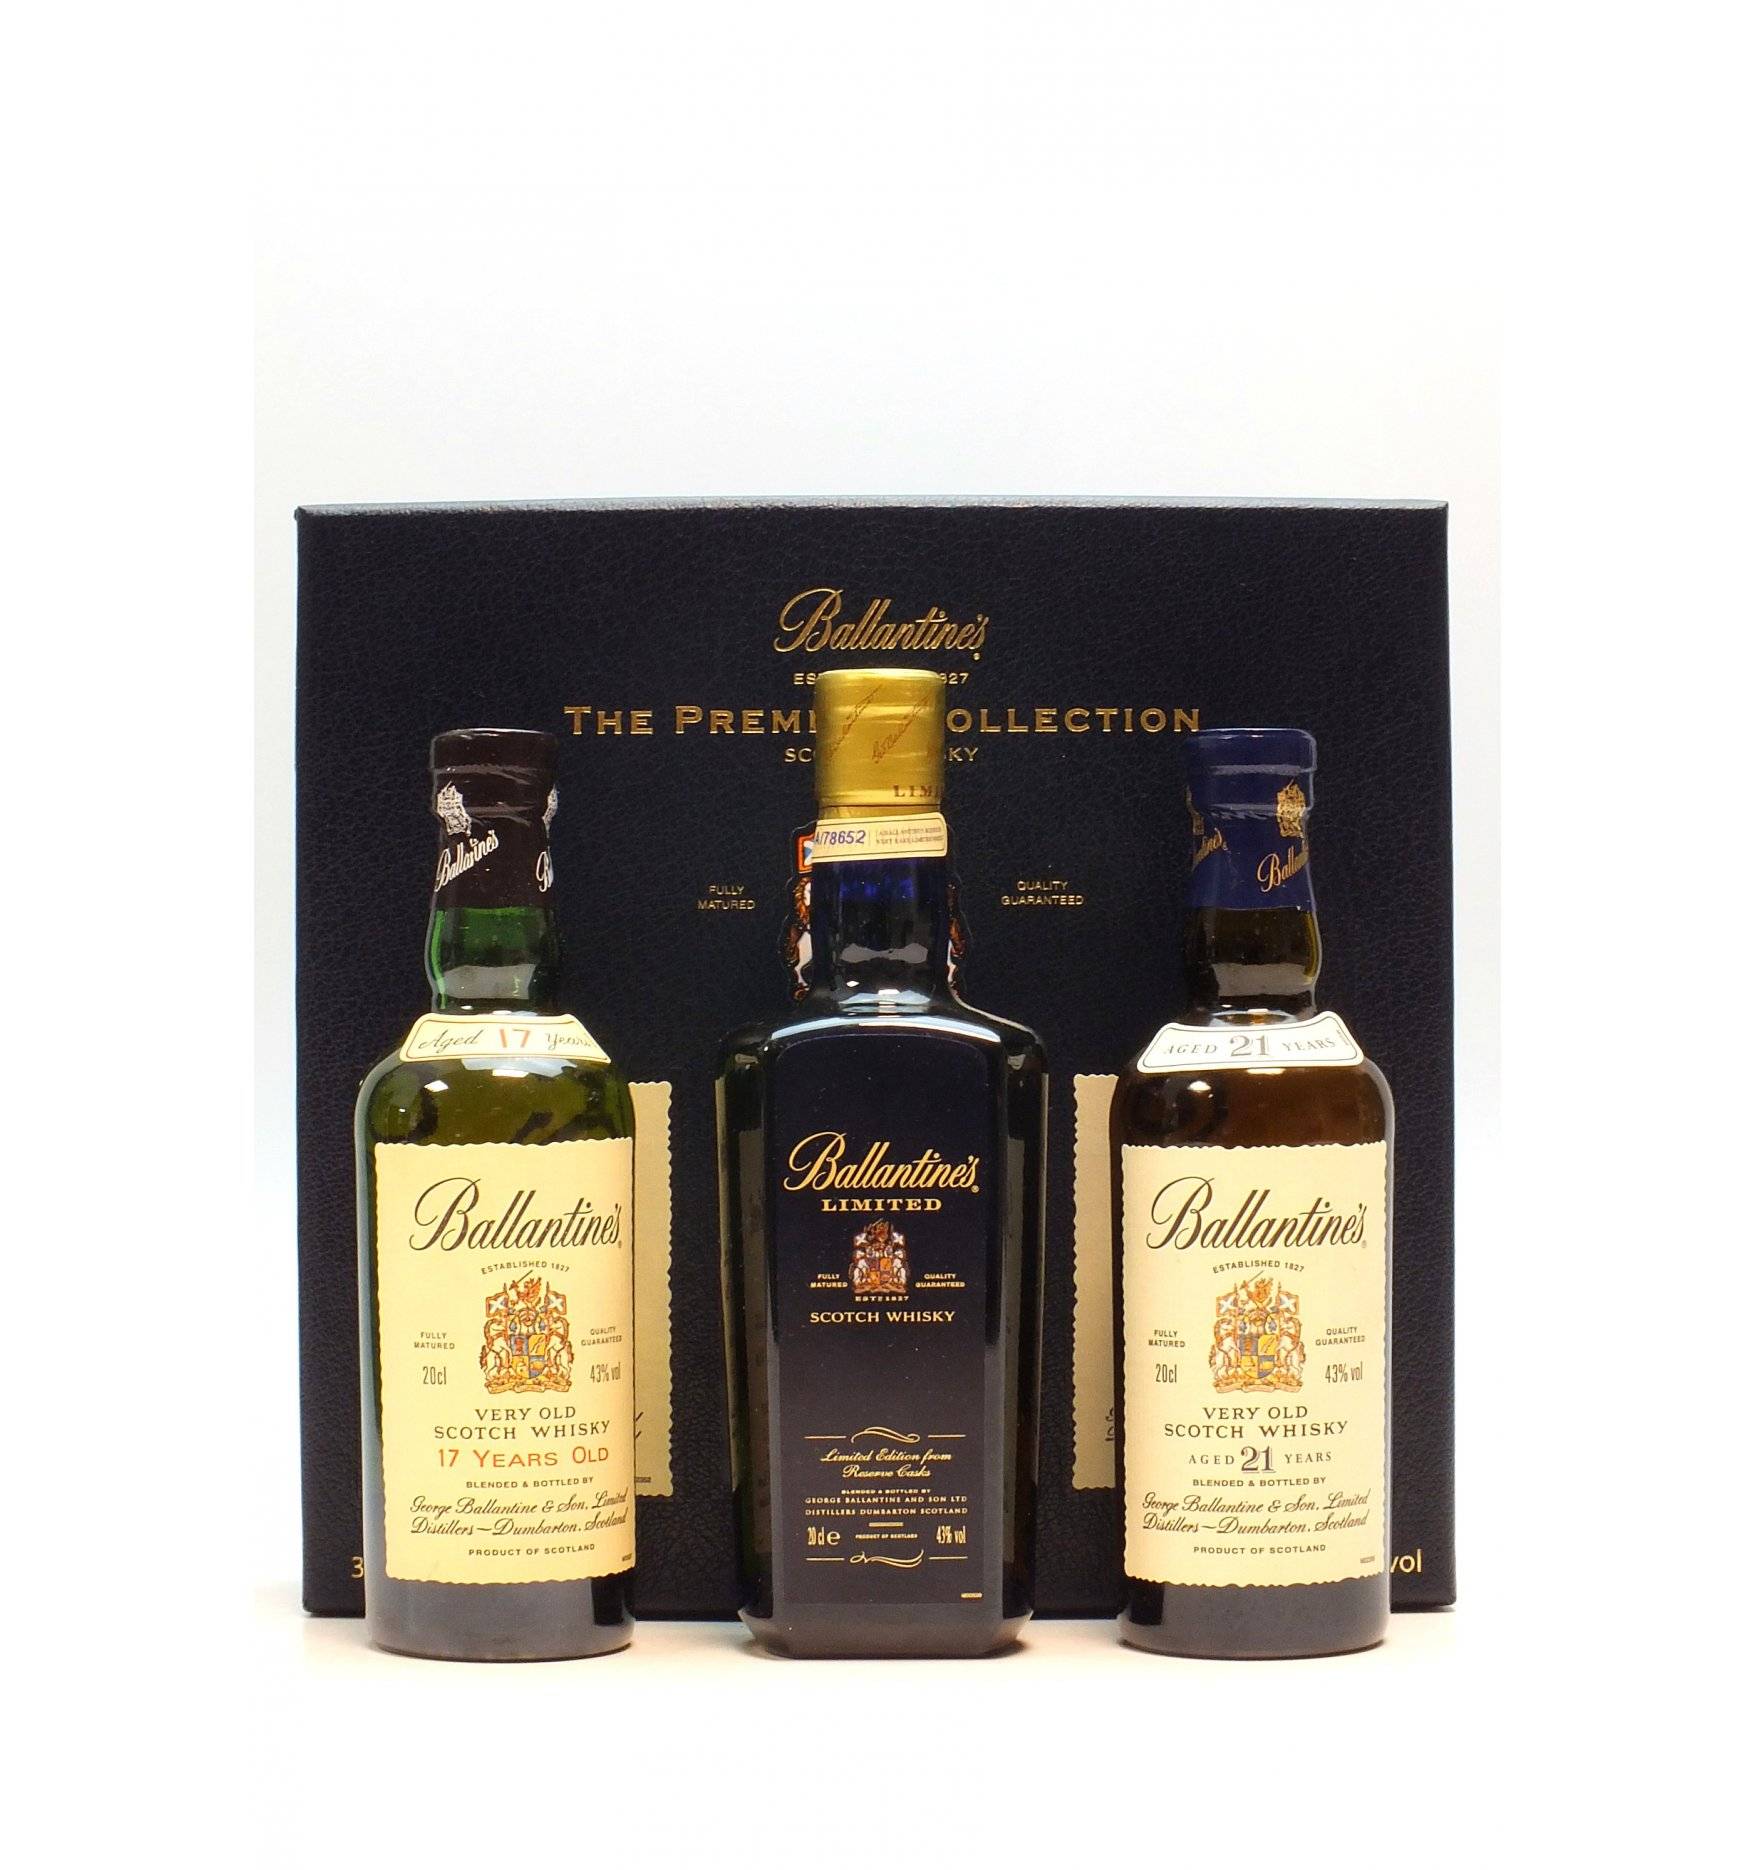 Ballantine's The Premium Collection (20cl x3) - Just Whisky Auctions